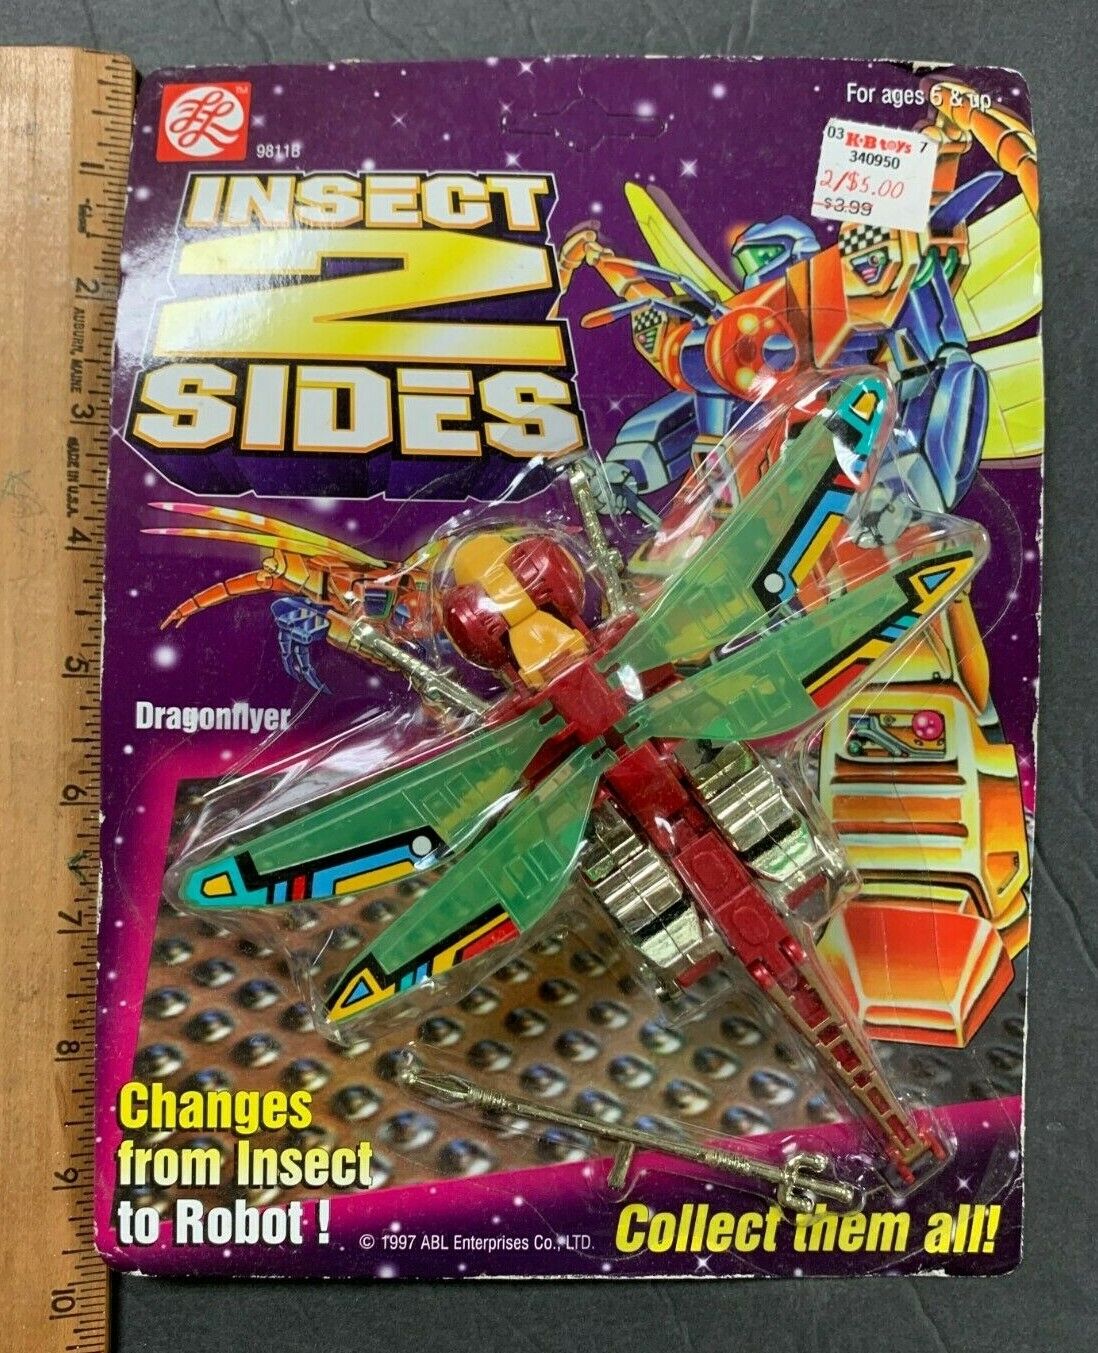 1997 INSECT 2 SIDES * DRAGONFLYER * FROM INSECT TO ROBOT BNIB (AA) 111421